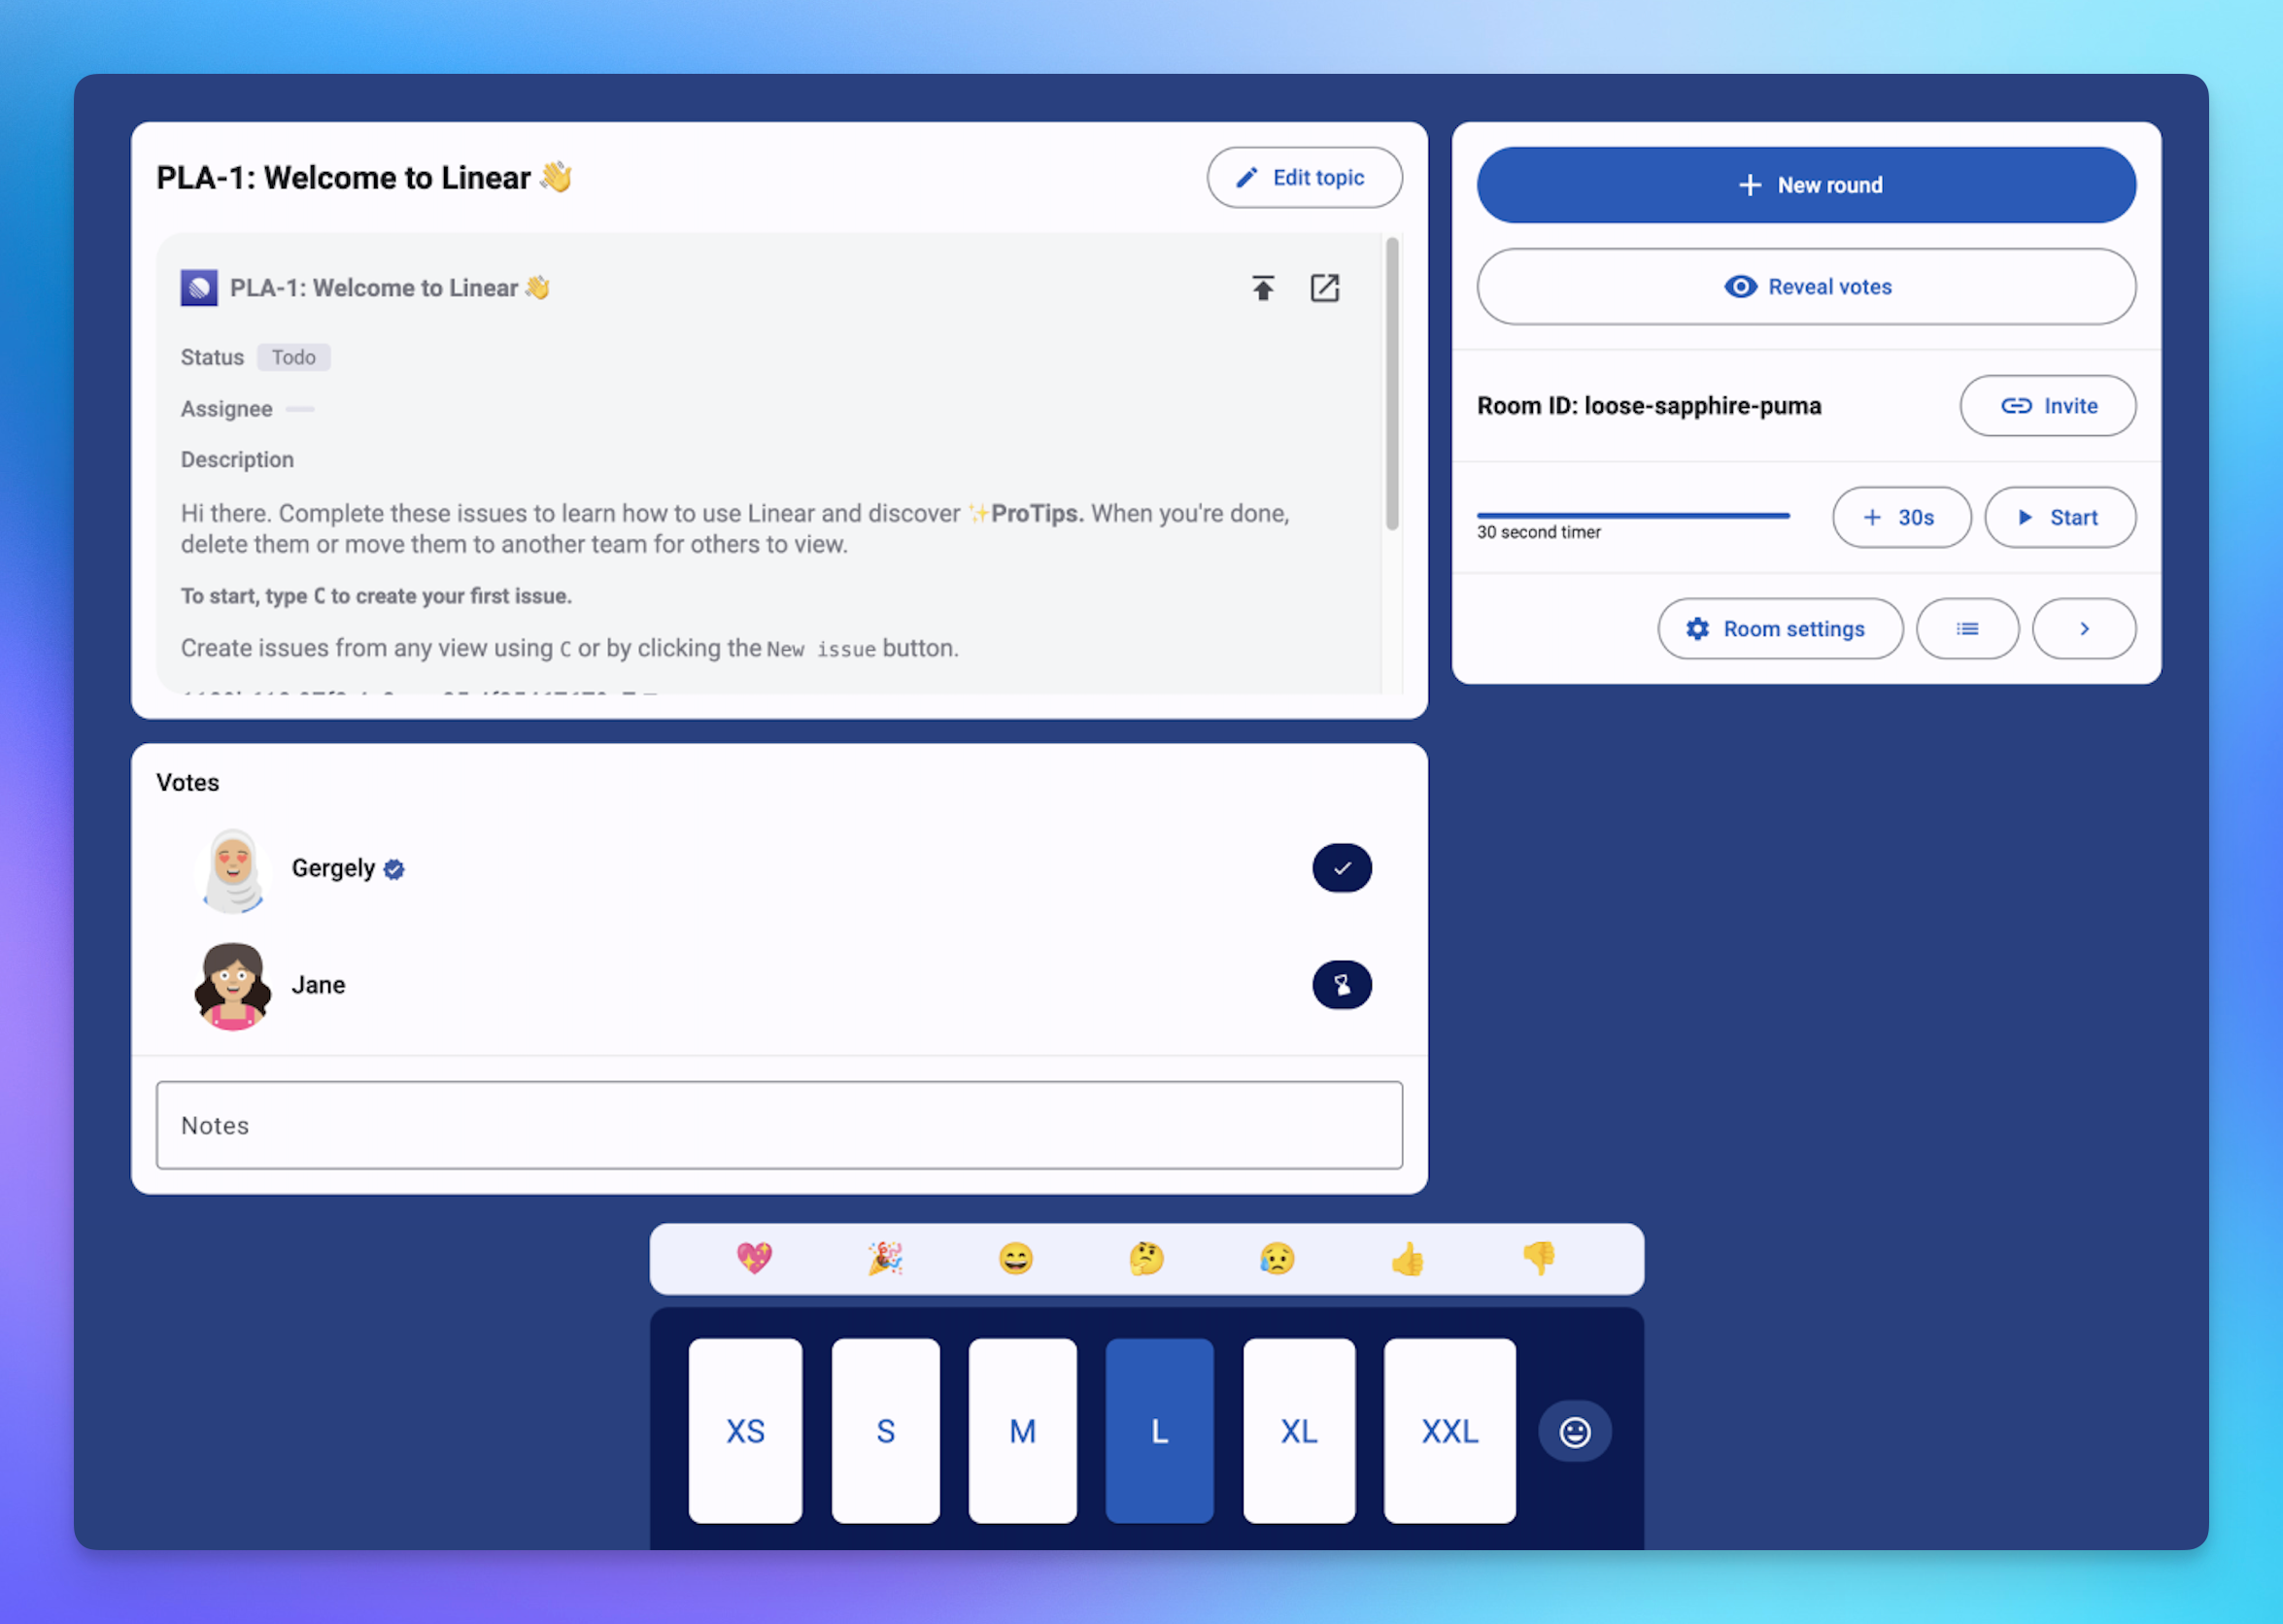 PlanningPoker.live interface showing voting options for estimates